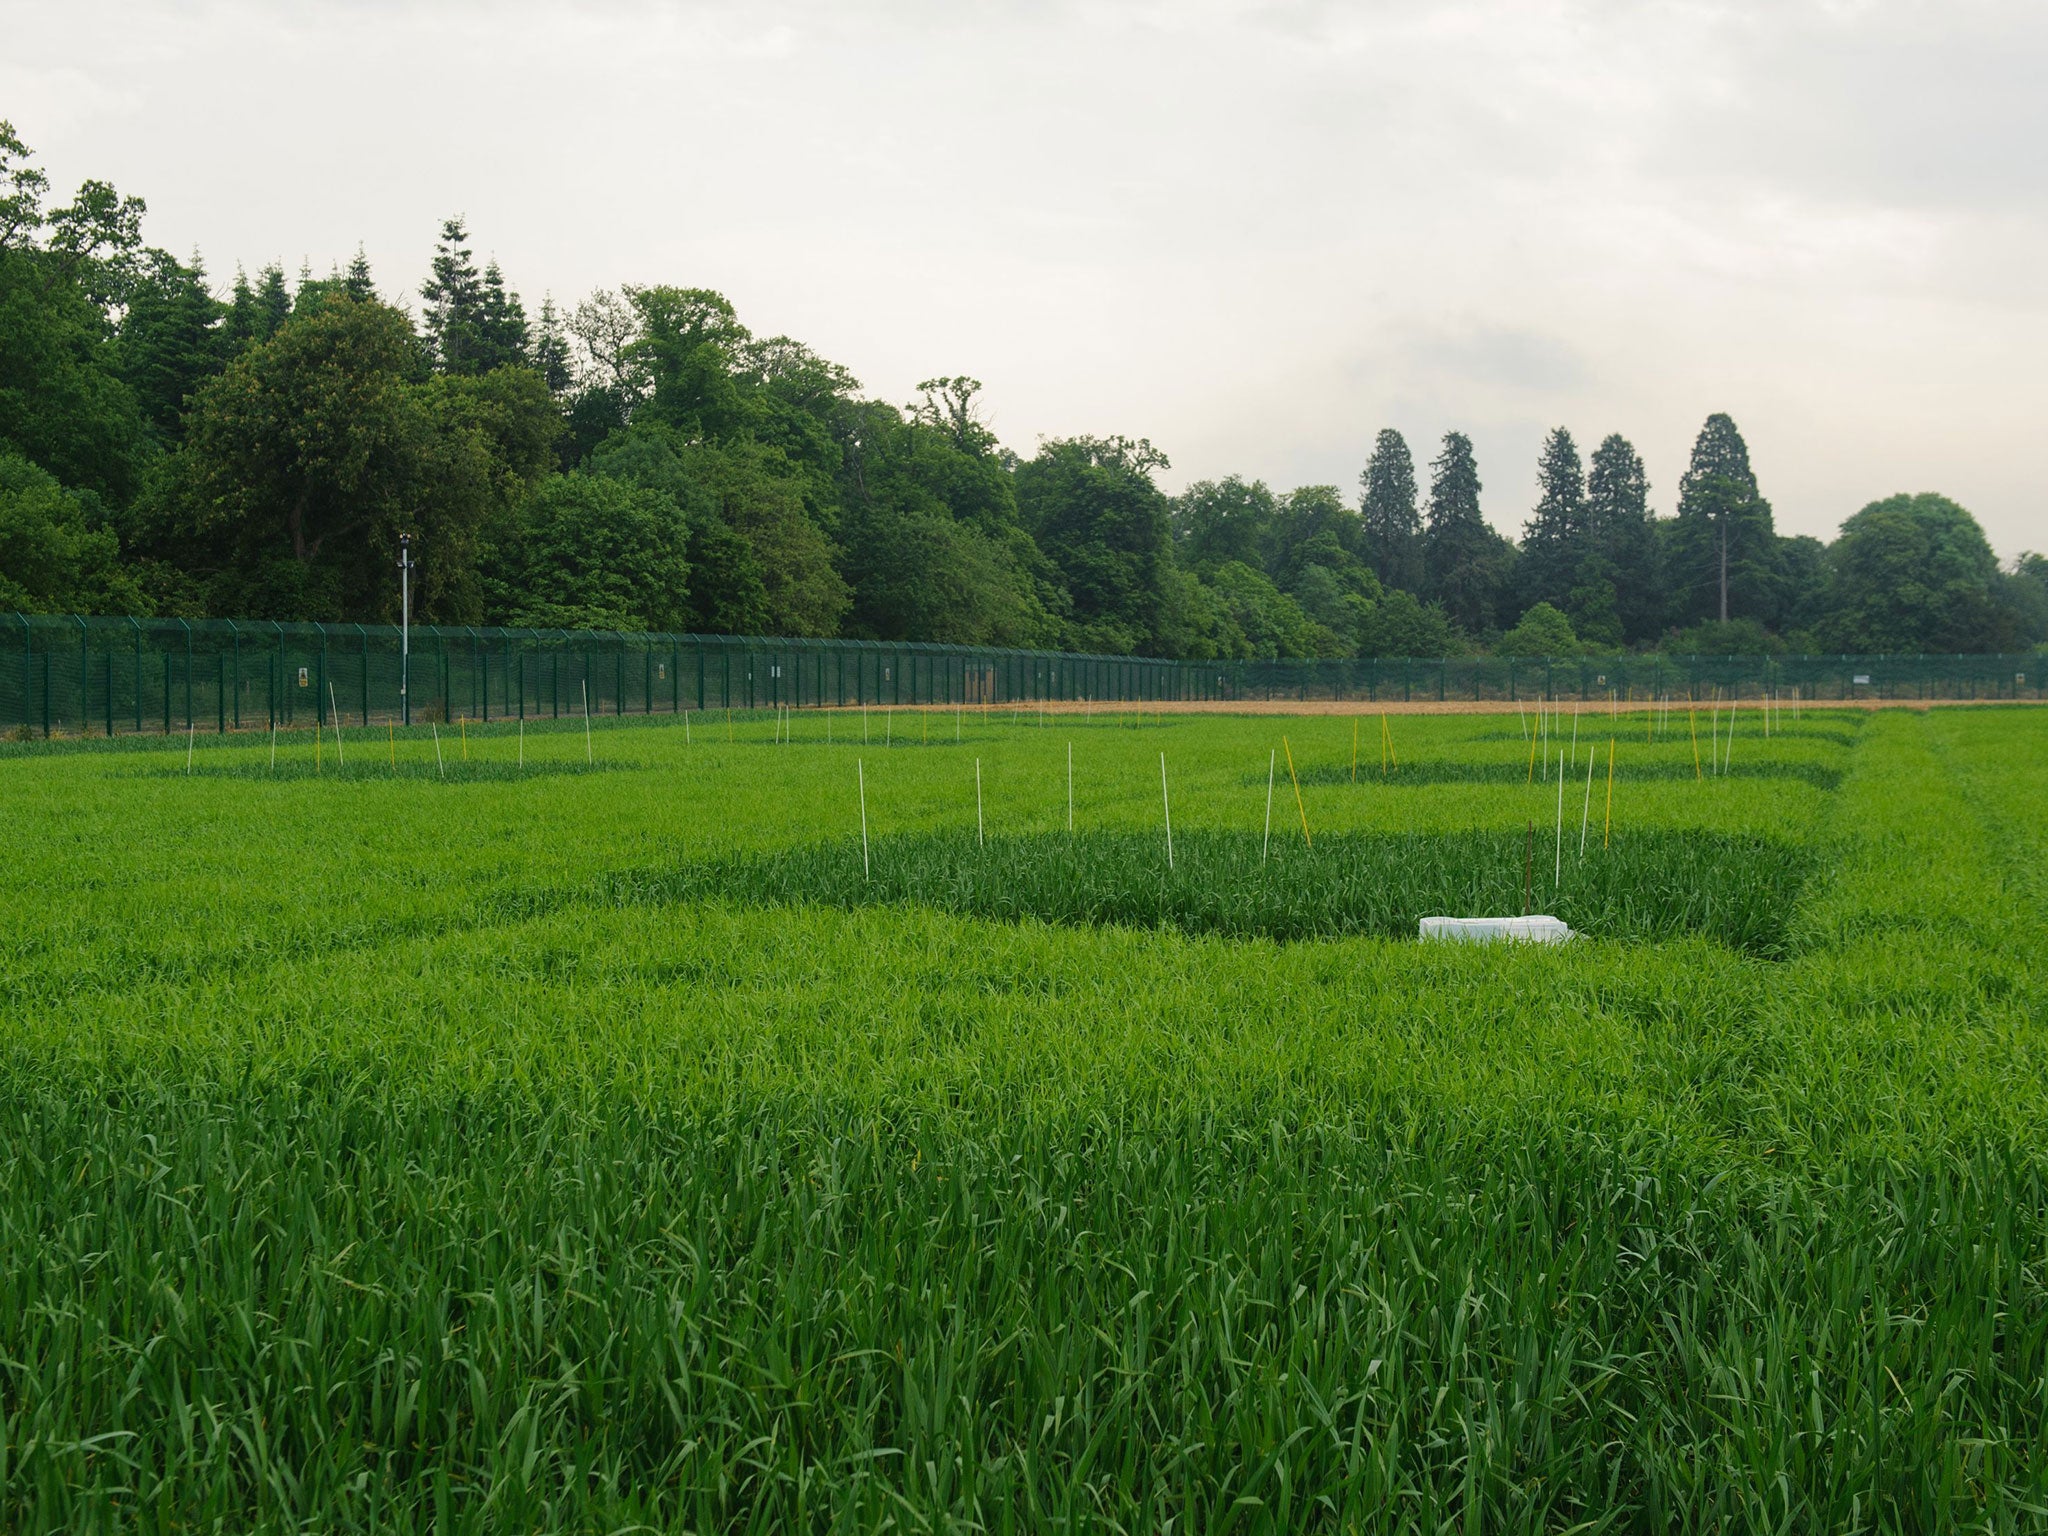 The site of a genetically modified crop trial